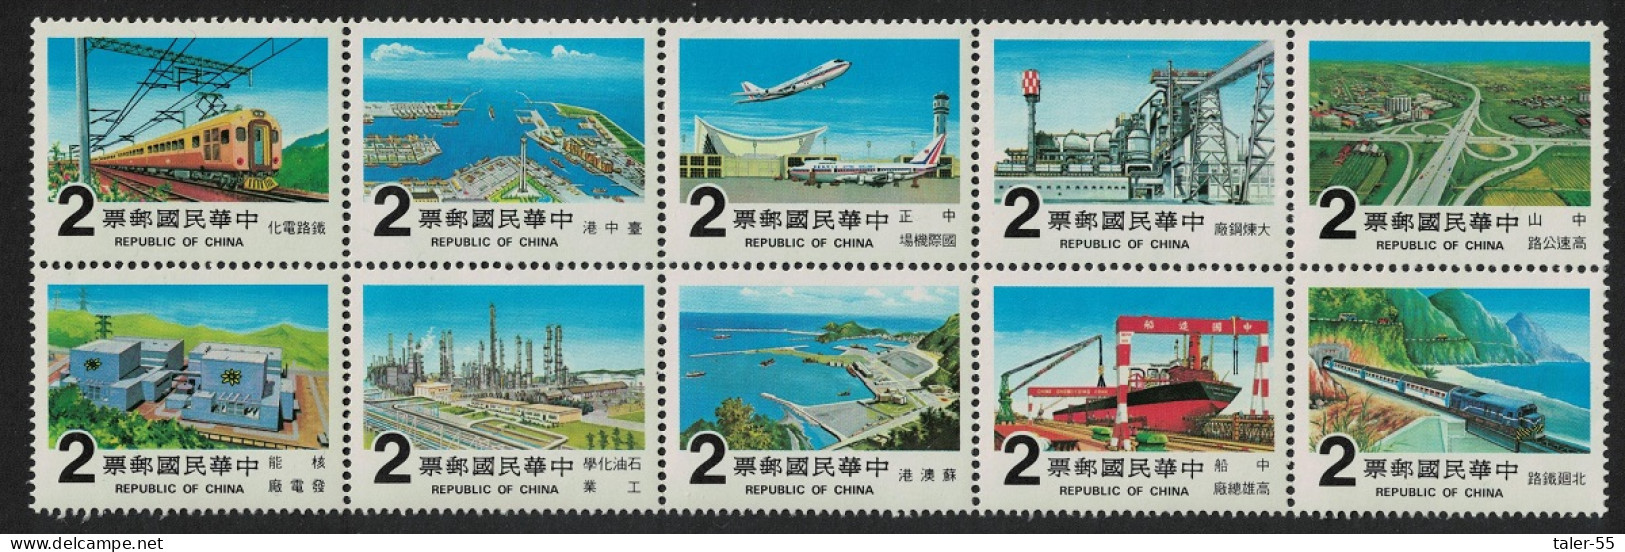 Taiwan Completion Of Ten Major Construction Projects 10v 1980 MNH SG#1316-1325 - Nuevos